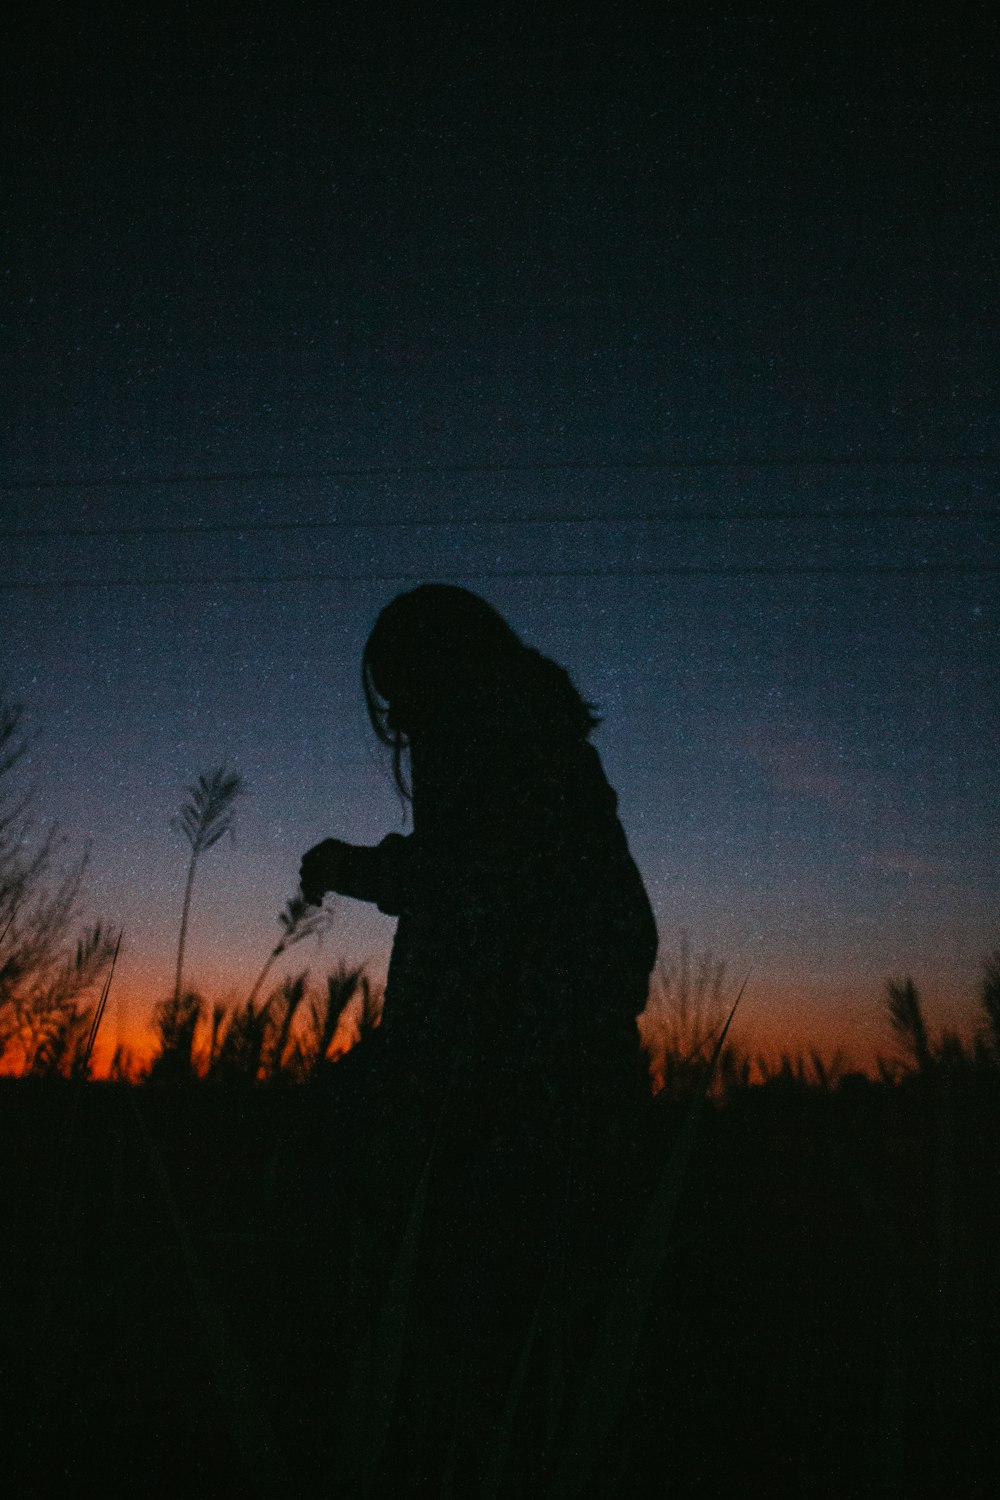 silhouette of woman standing on grass field during night time